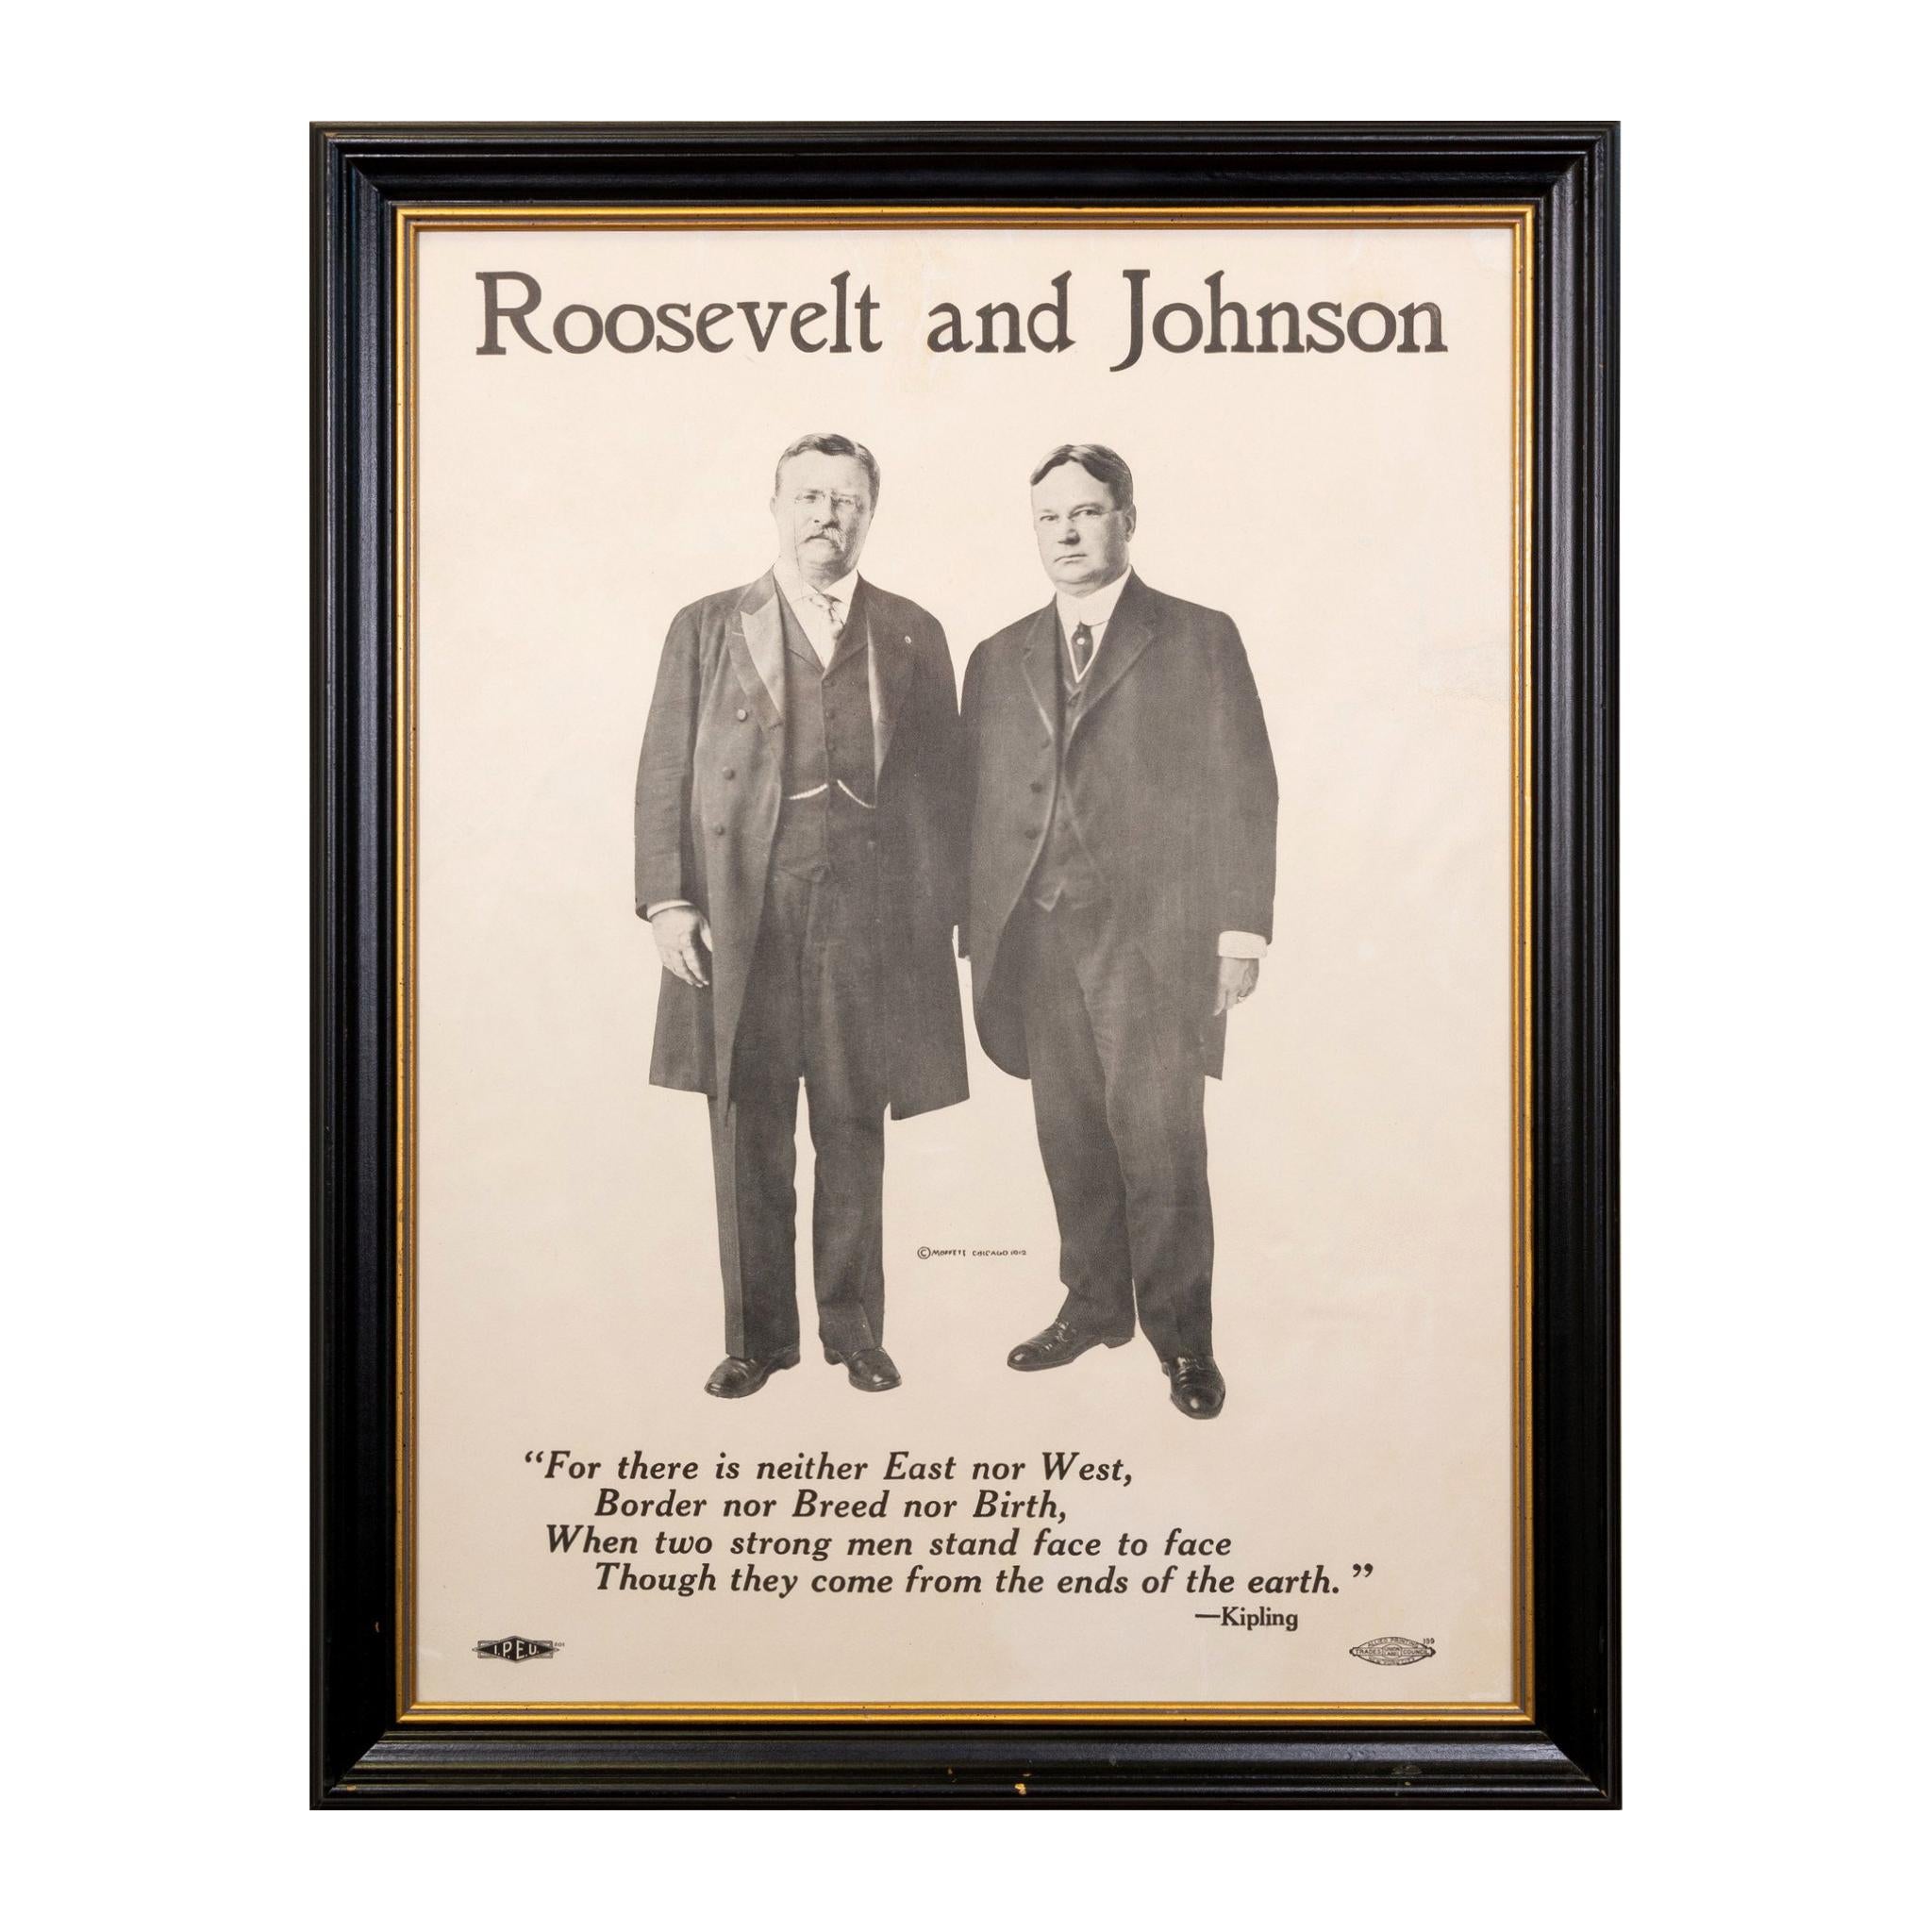 1912 "Teddy" Roosevelt and Johnson Campaign Poster